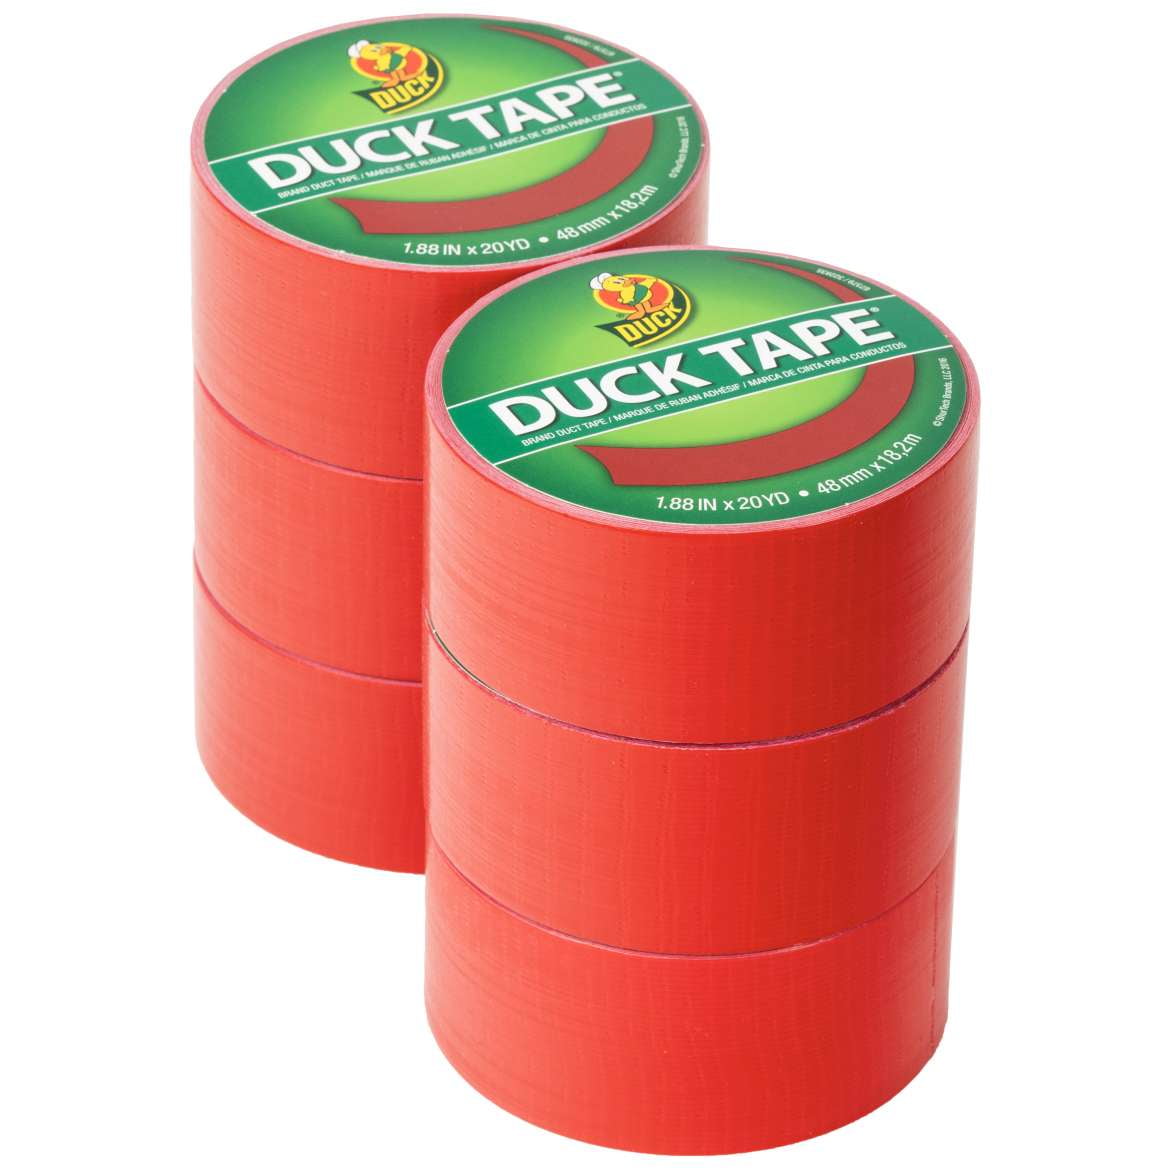 Pack of 6 Duck Tape Pattern Colours Buffalo Plaid 48mm x 9.1m